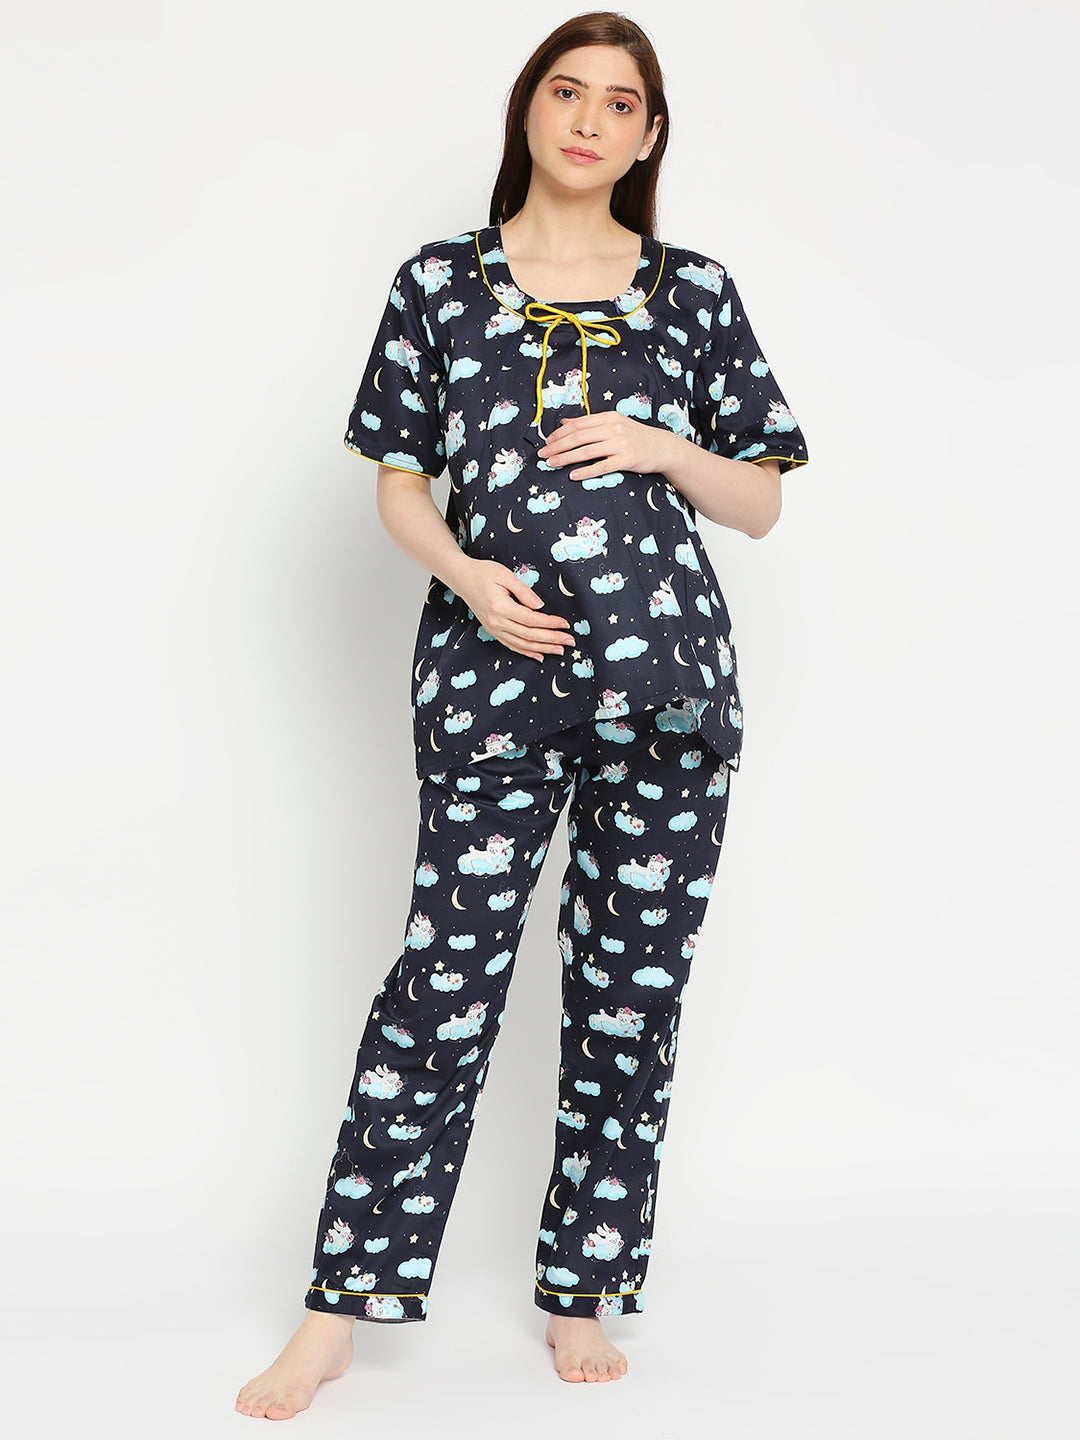 Bunny In The Cloud Maternity Pj Set - Pure Cotton Pj Set in Round Neck with 2 Invisible Zips for Feeding